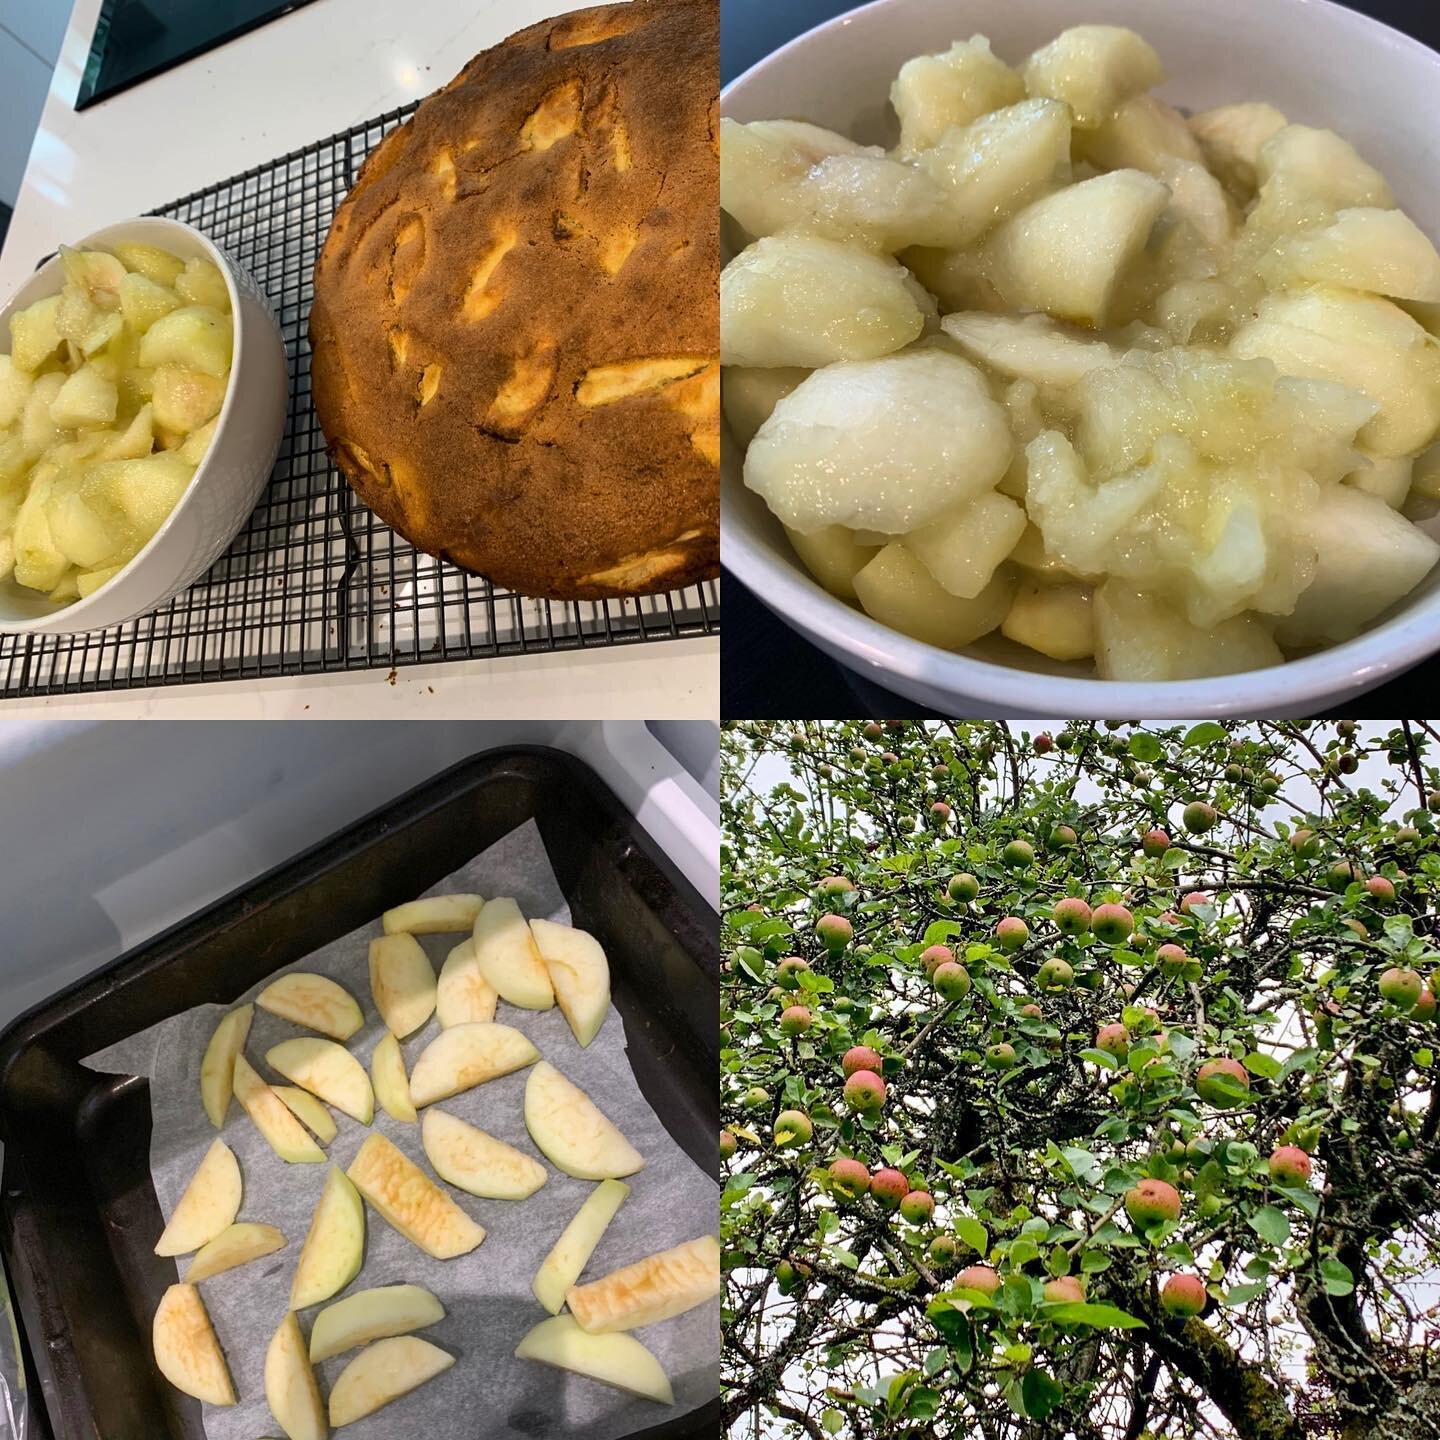 So many 🍎 🍏!! We&rsquo;ve had a bumper crop this year, so it&rsquo;s time to bake! 
Italian apple cake, stewed apple in preparation for pie, and then some frozen for future. (Wasn&rsquo;t quick enough to escape the browning tho!) 
I need more inspi